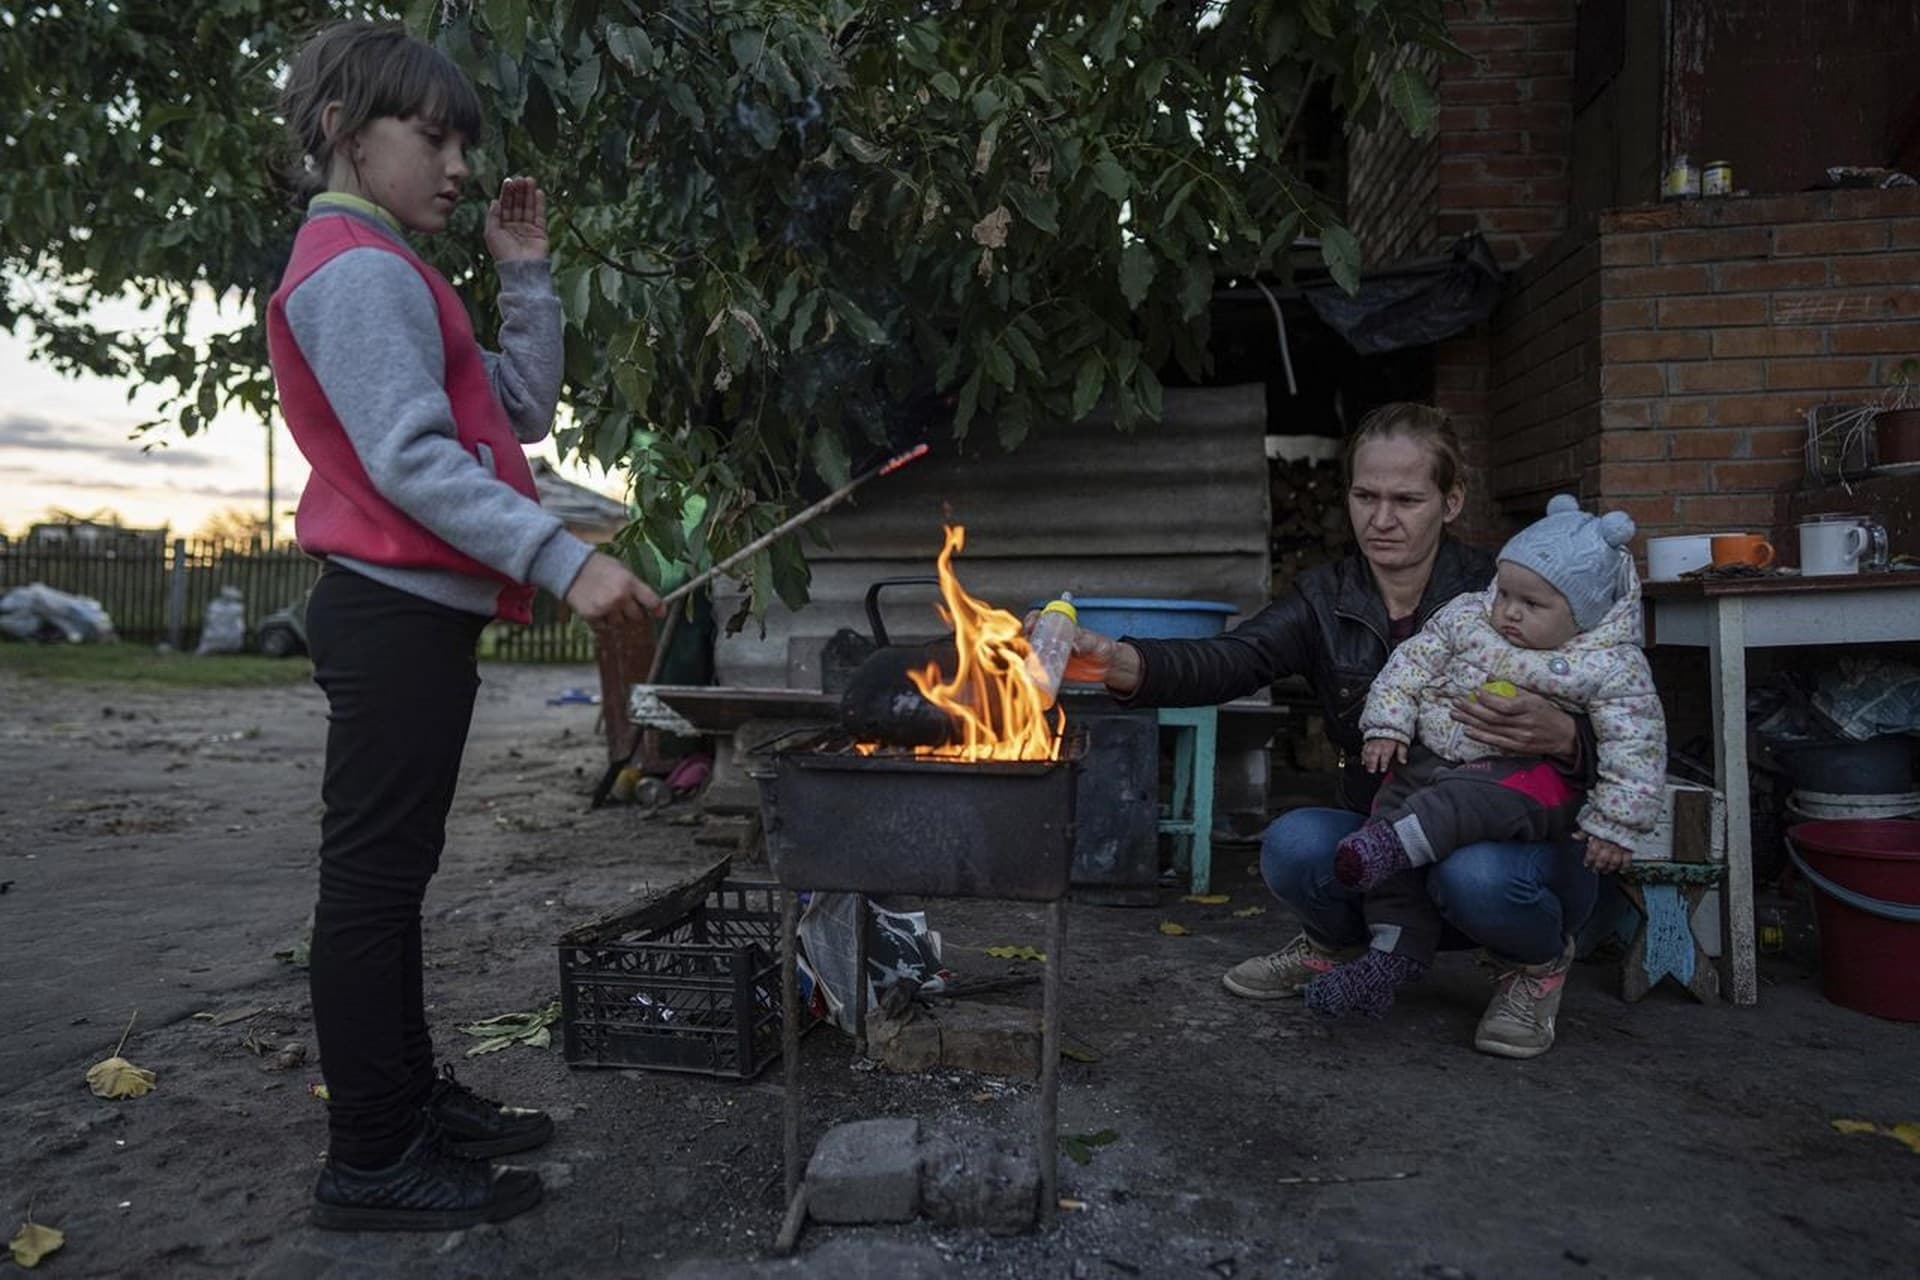 Margaryta Tkachenko warms food on an open fire for her 9-month-old daughter Sophia in the recently retaken town of Izium